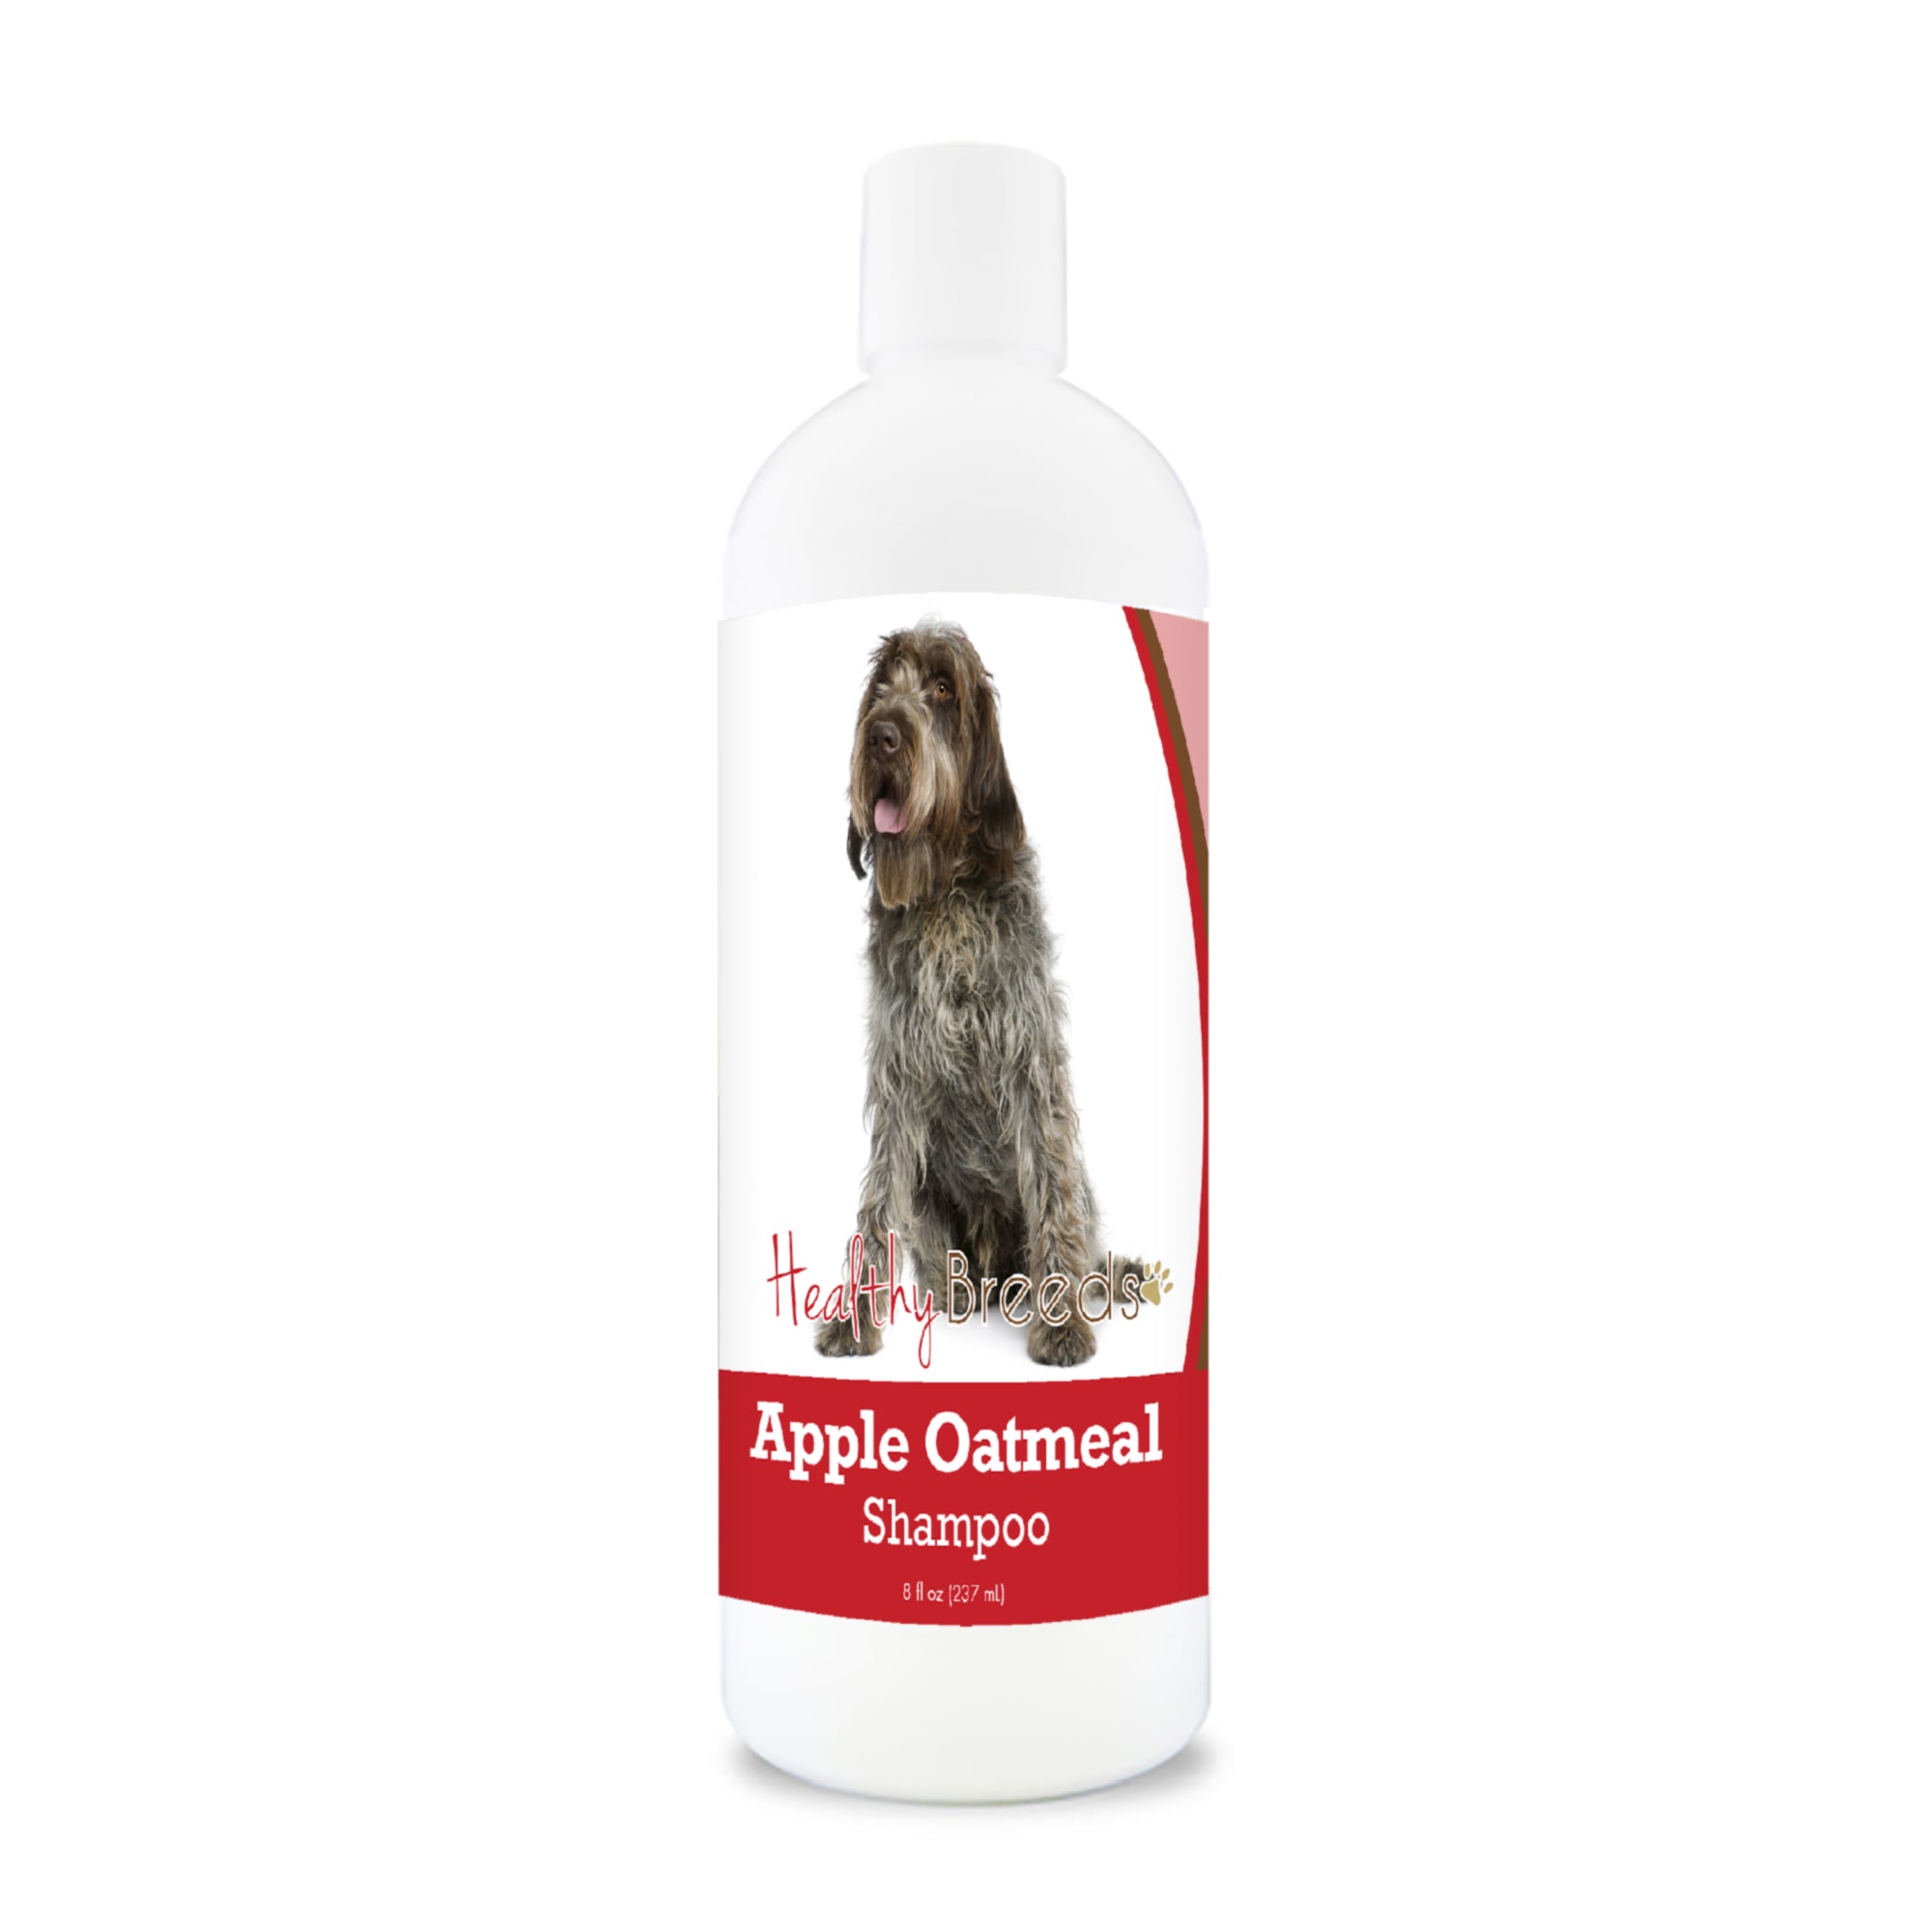 Wirehaired Pointing Griffon Apple Oatmeal Shampoo 8 oz